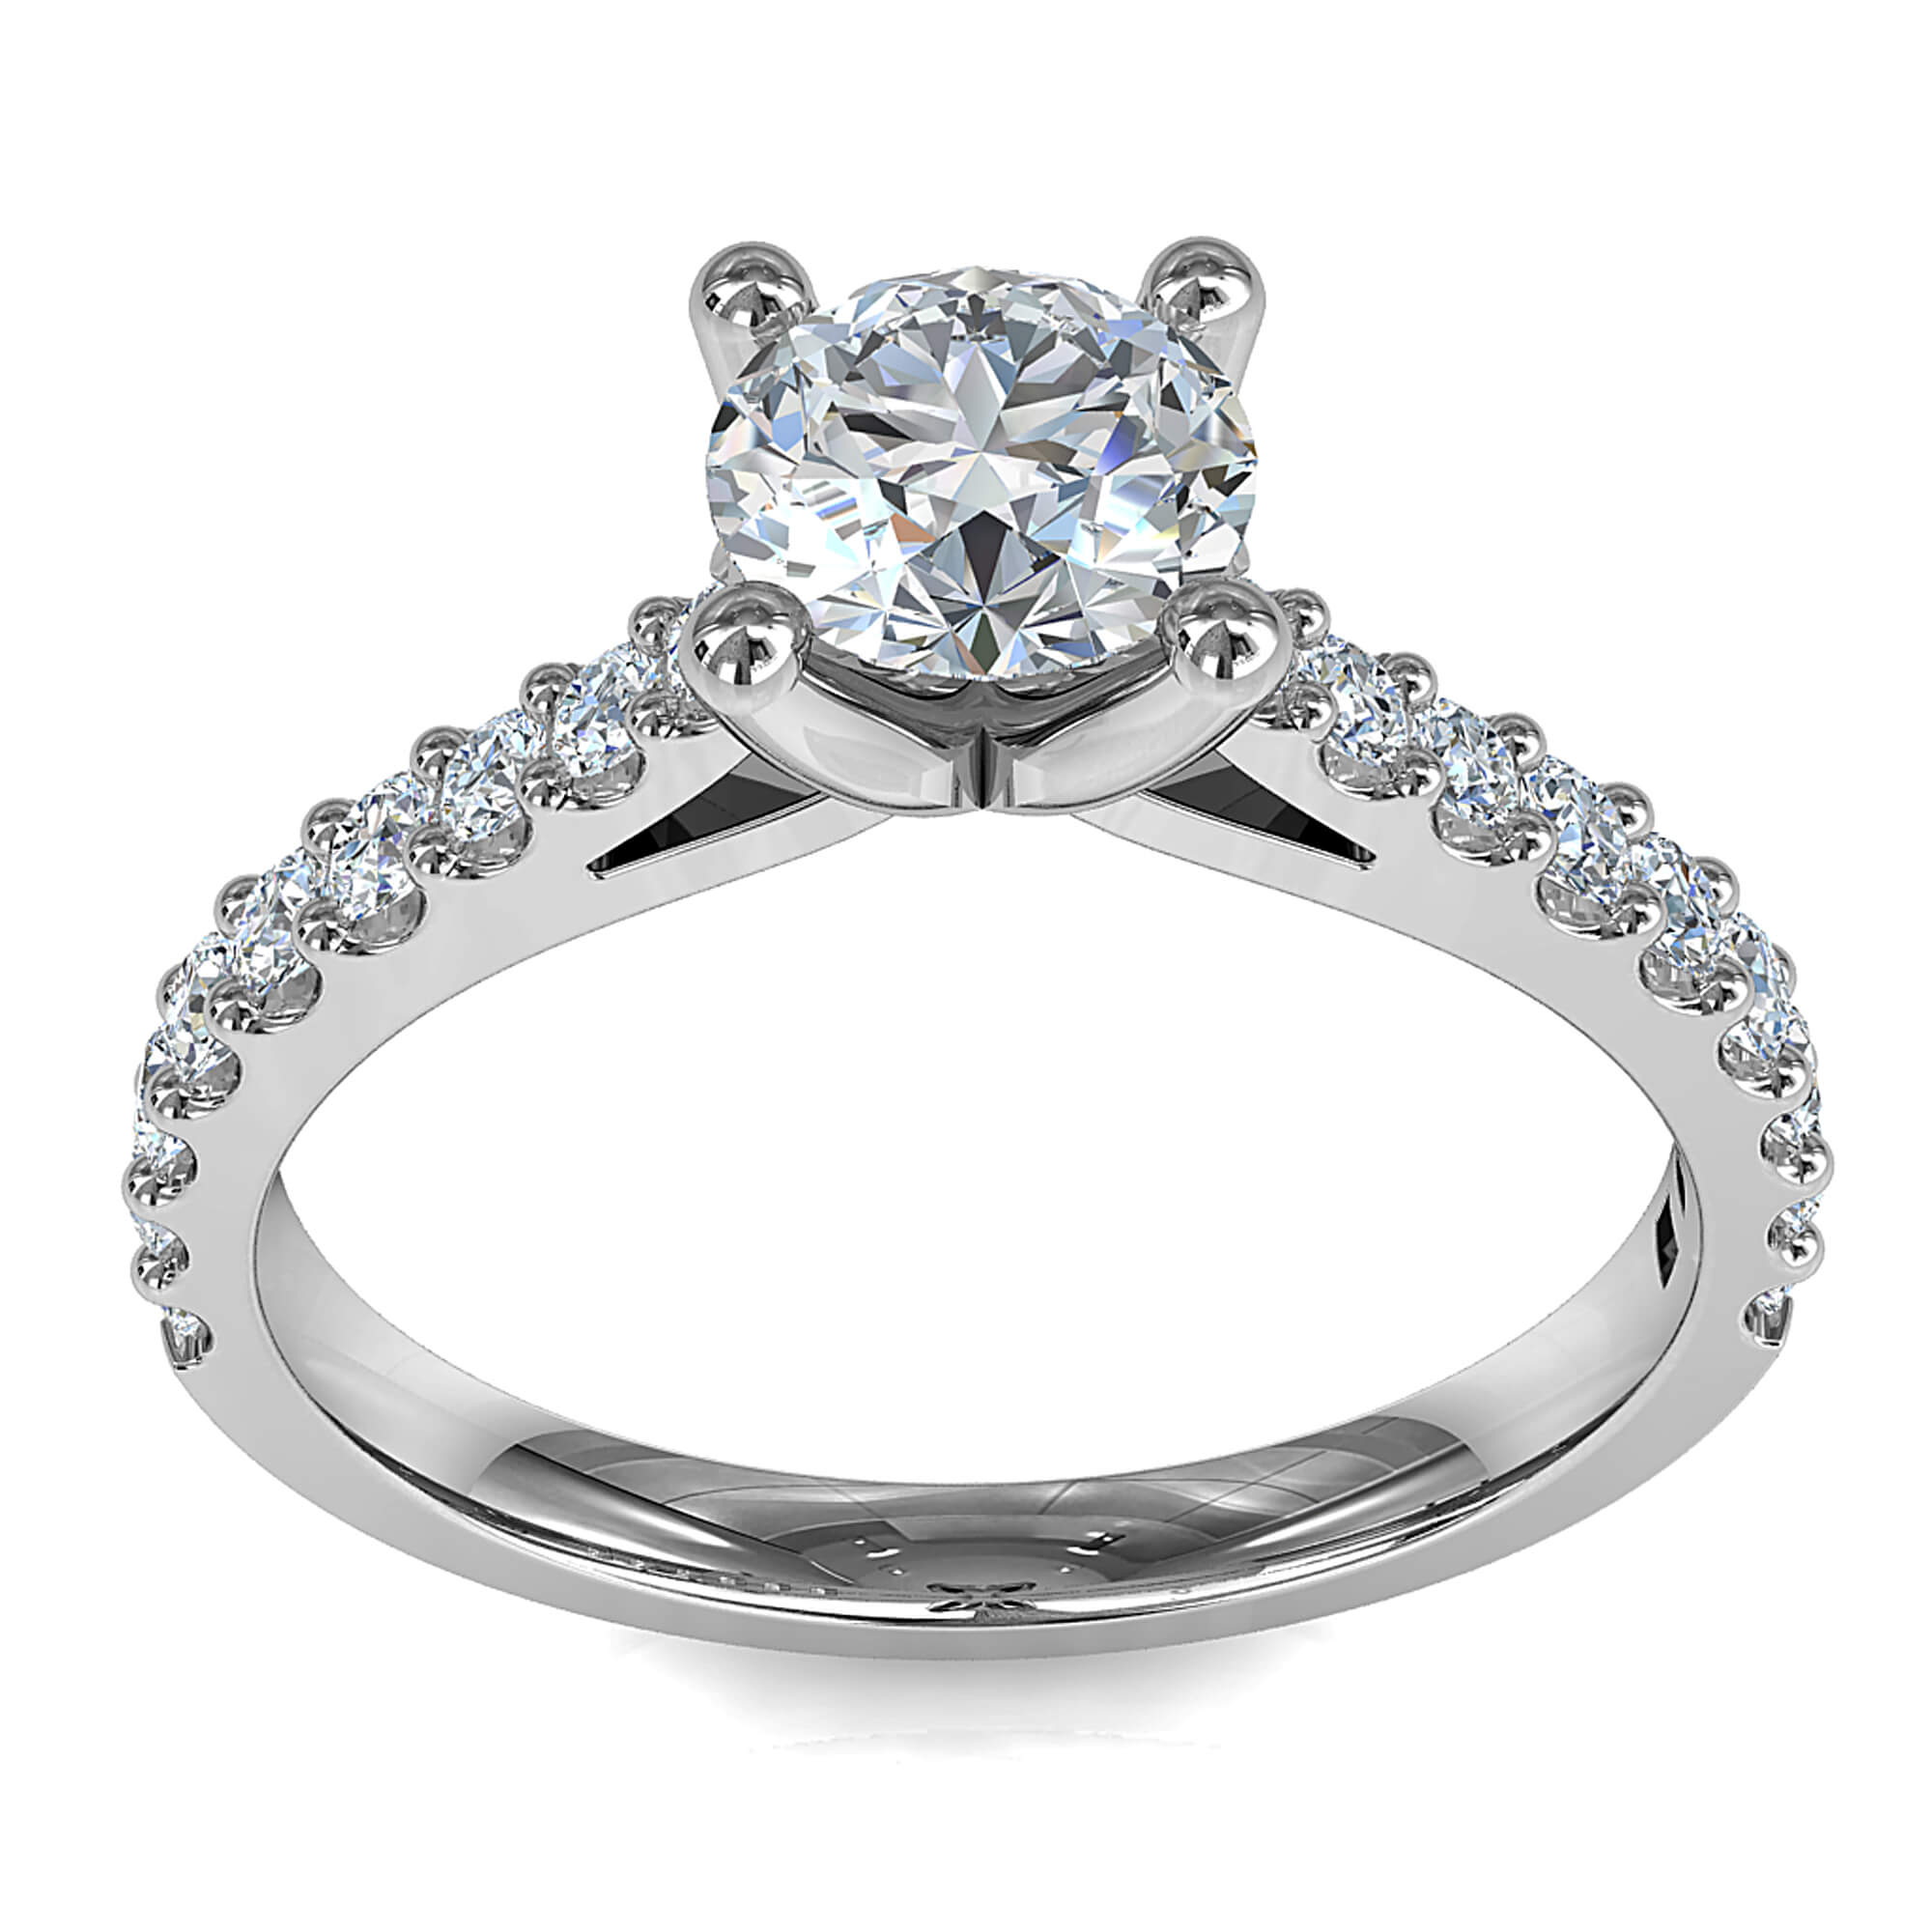 Round Brilliant Cut Solitaire Diamond Engagement Ring, 4 Button Claws Set on a Tapered Cut Claw Band with Fluted Undersetting.